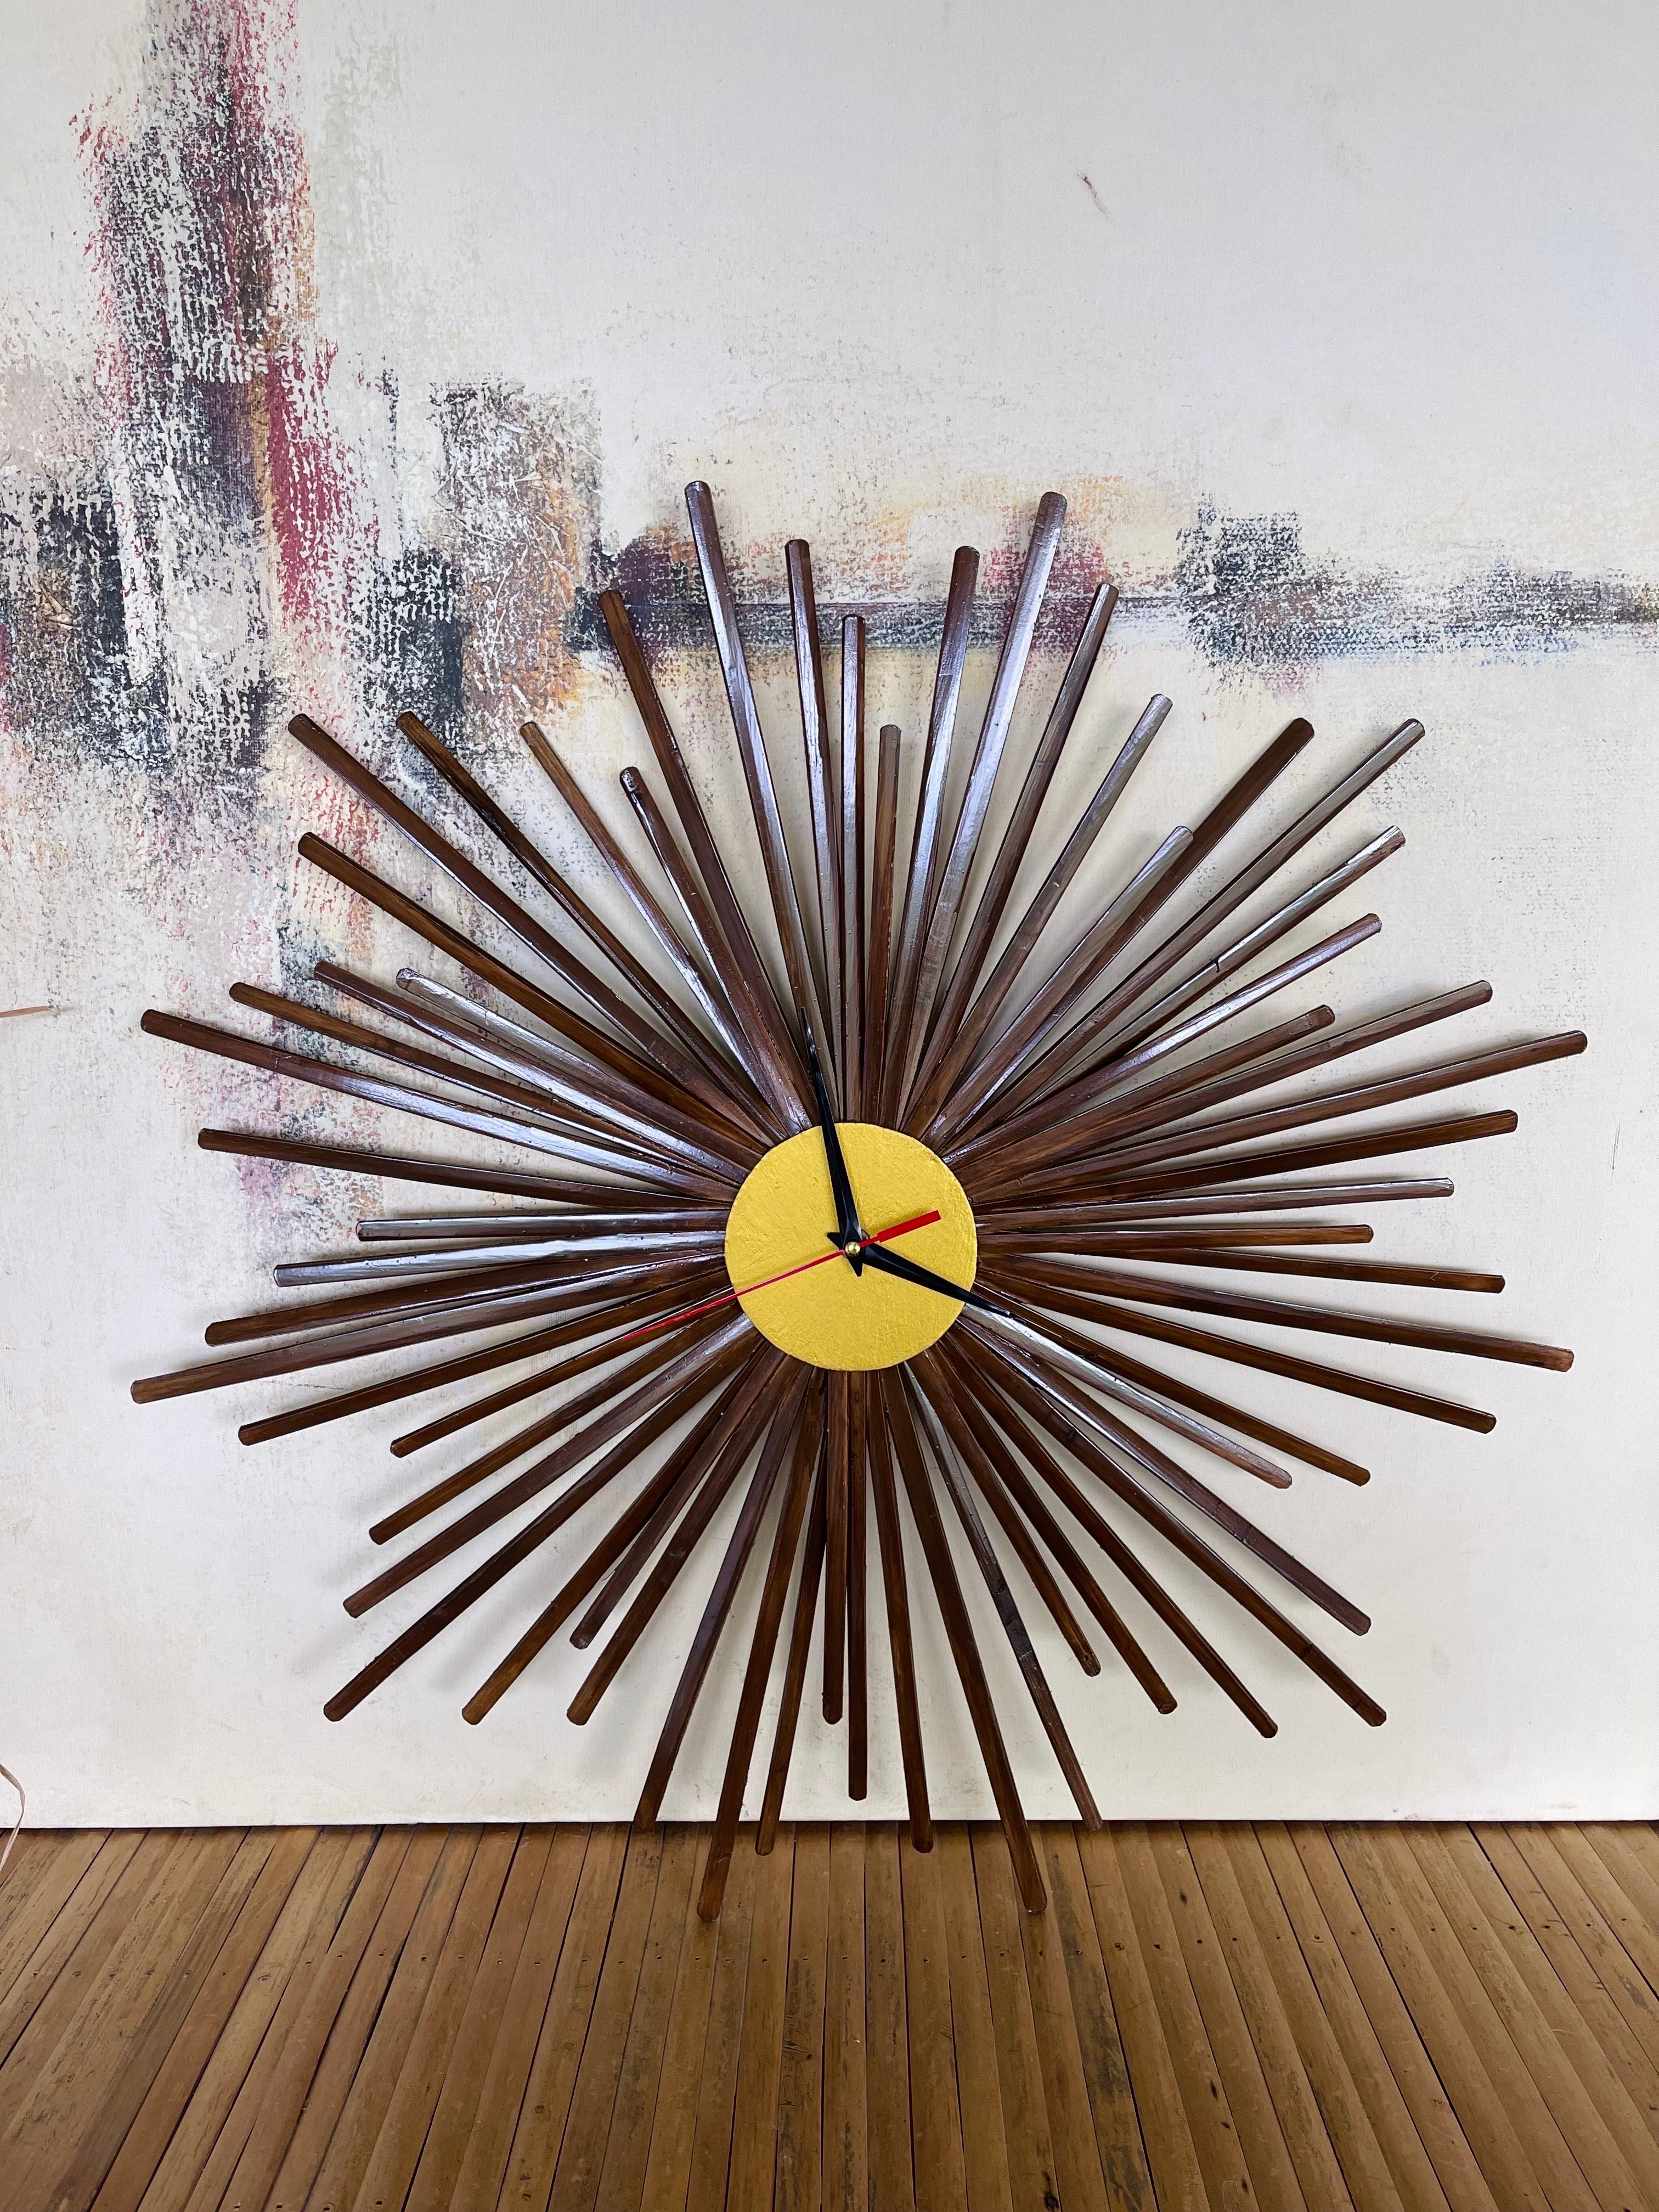 This is a High-quality Natural Rattan and Bamboo Mid Century style Starburst Clock Hand Crafted by local artisans in the Philippines

The clock measures 40cm in diameter

Organic Bamboo pieces with stain (All bamboo pieces were treated with